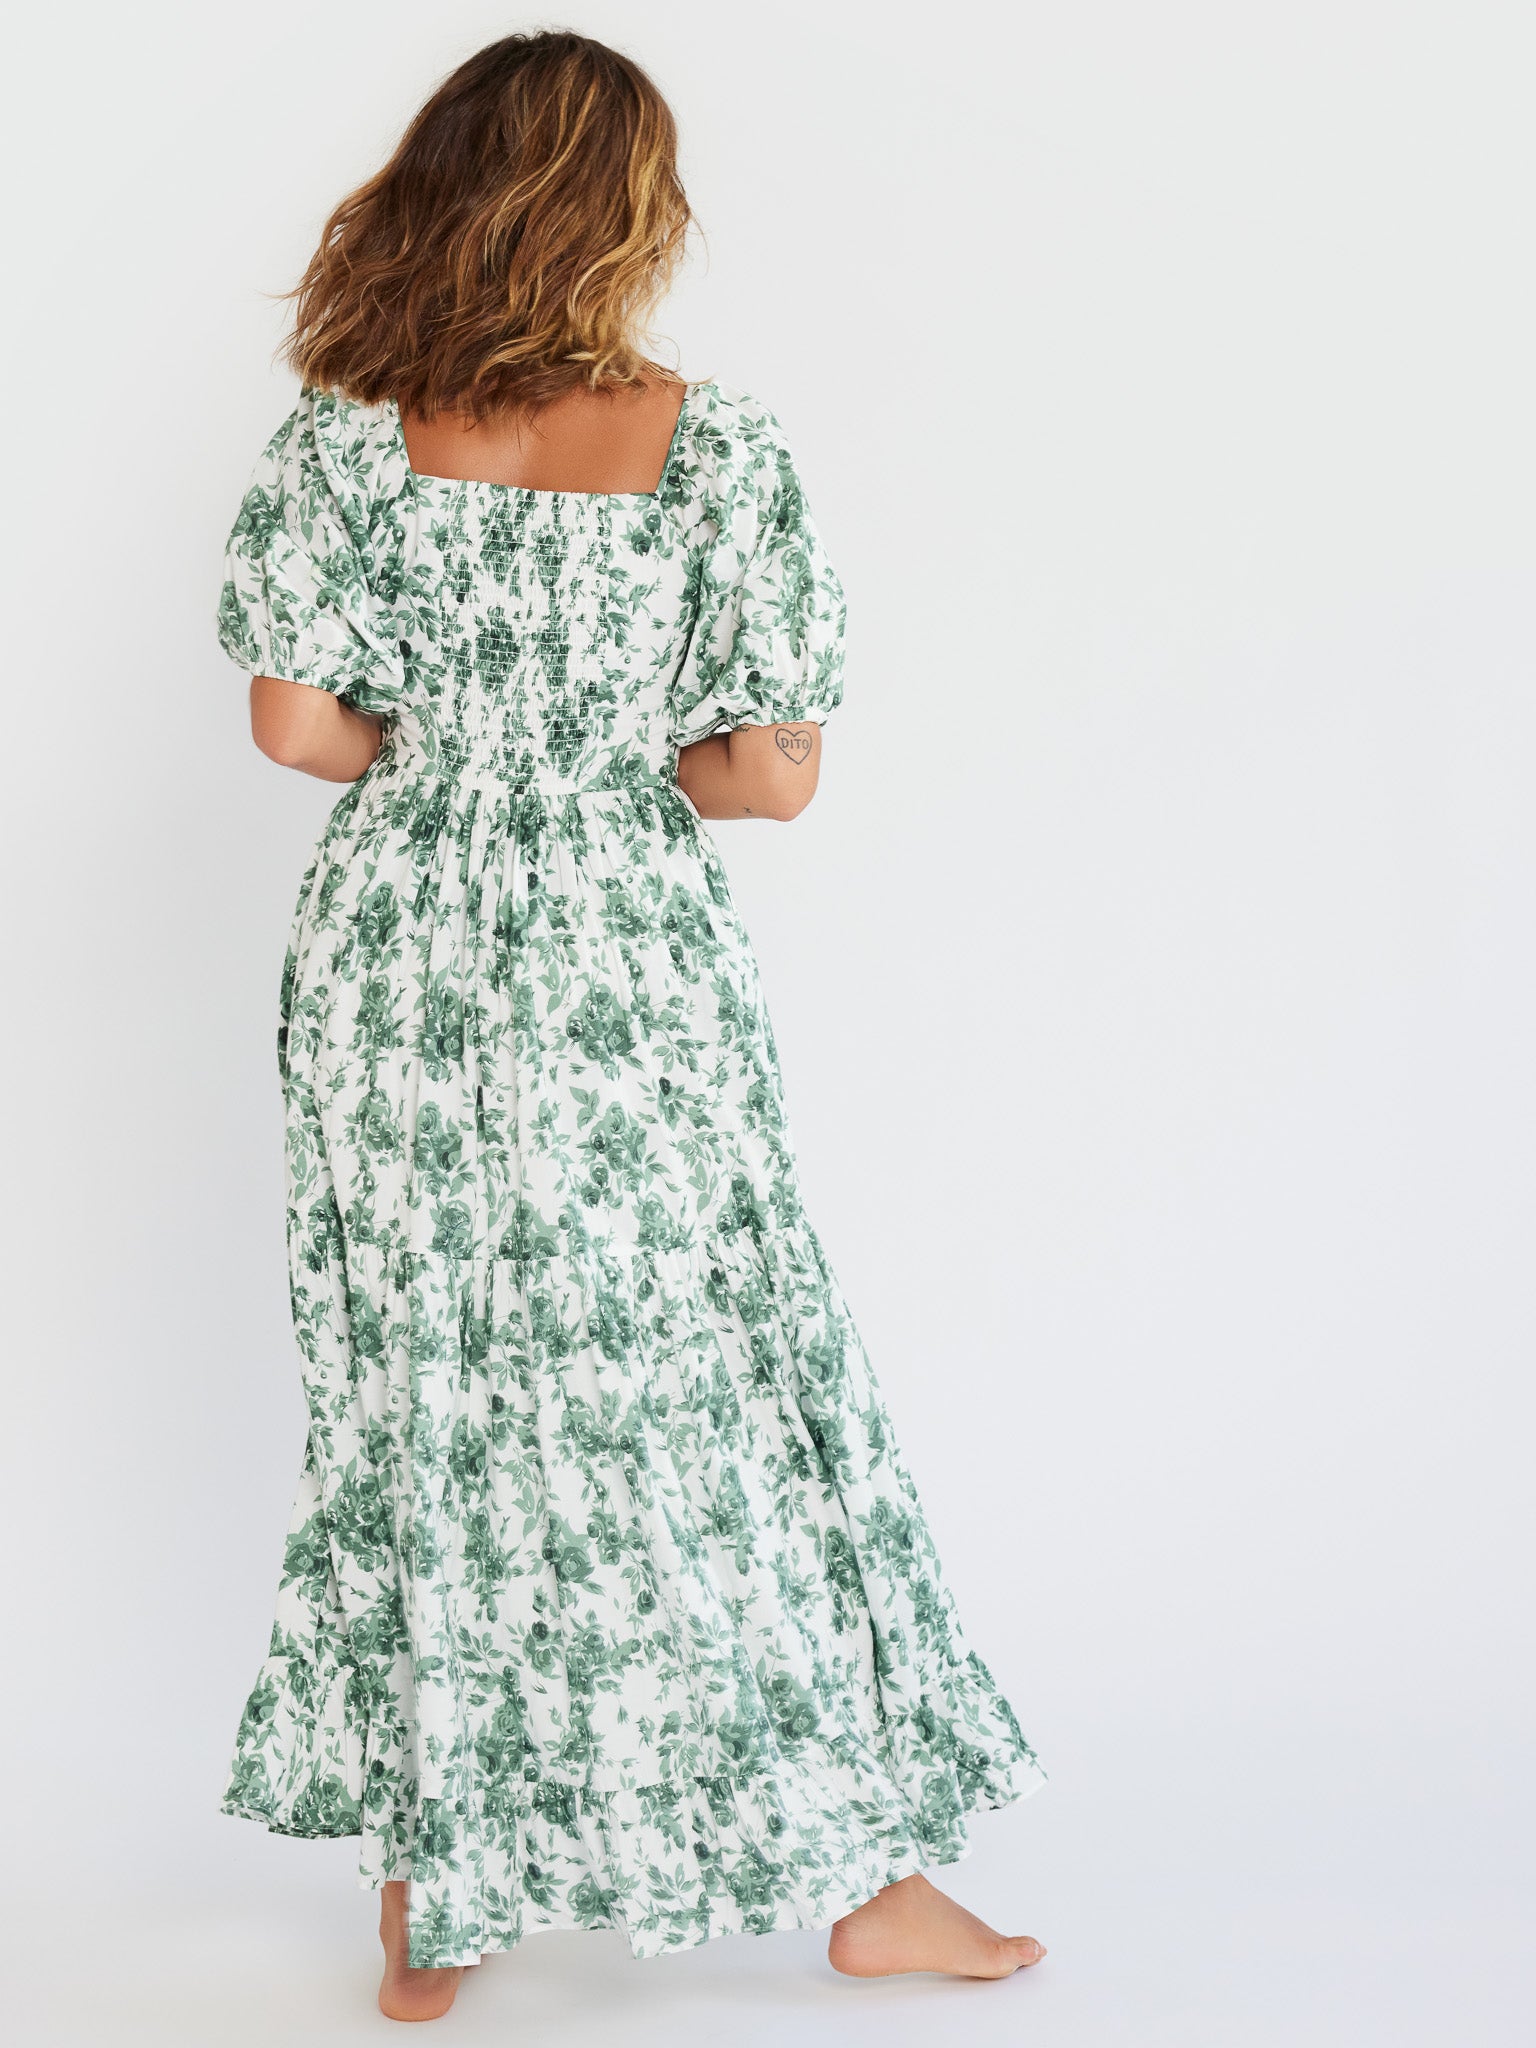 MILLE Clothing Manon Dress in Green Bouquet